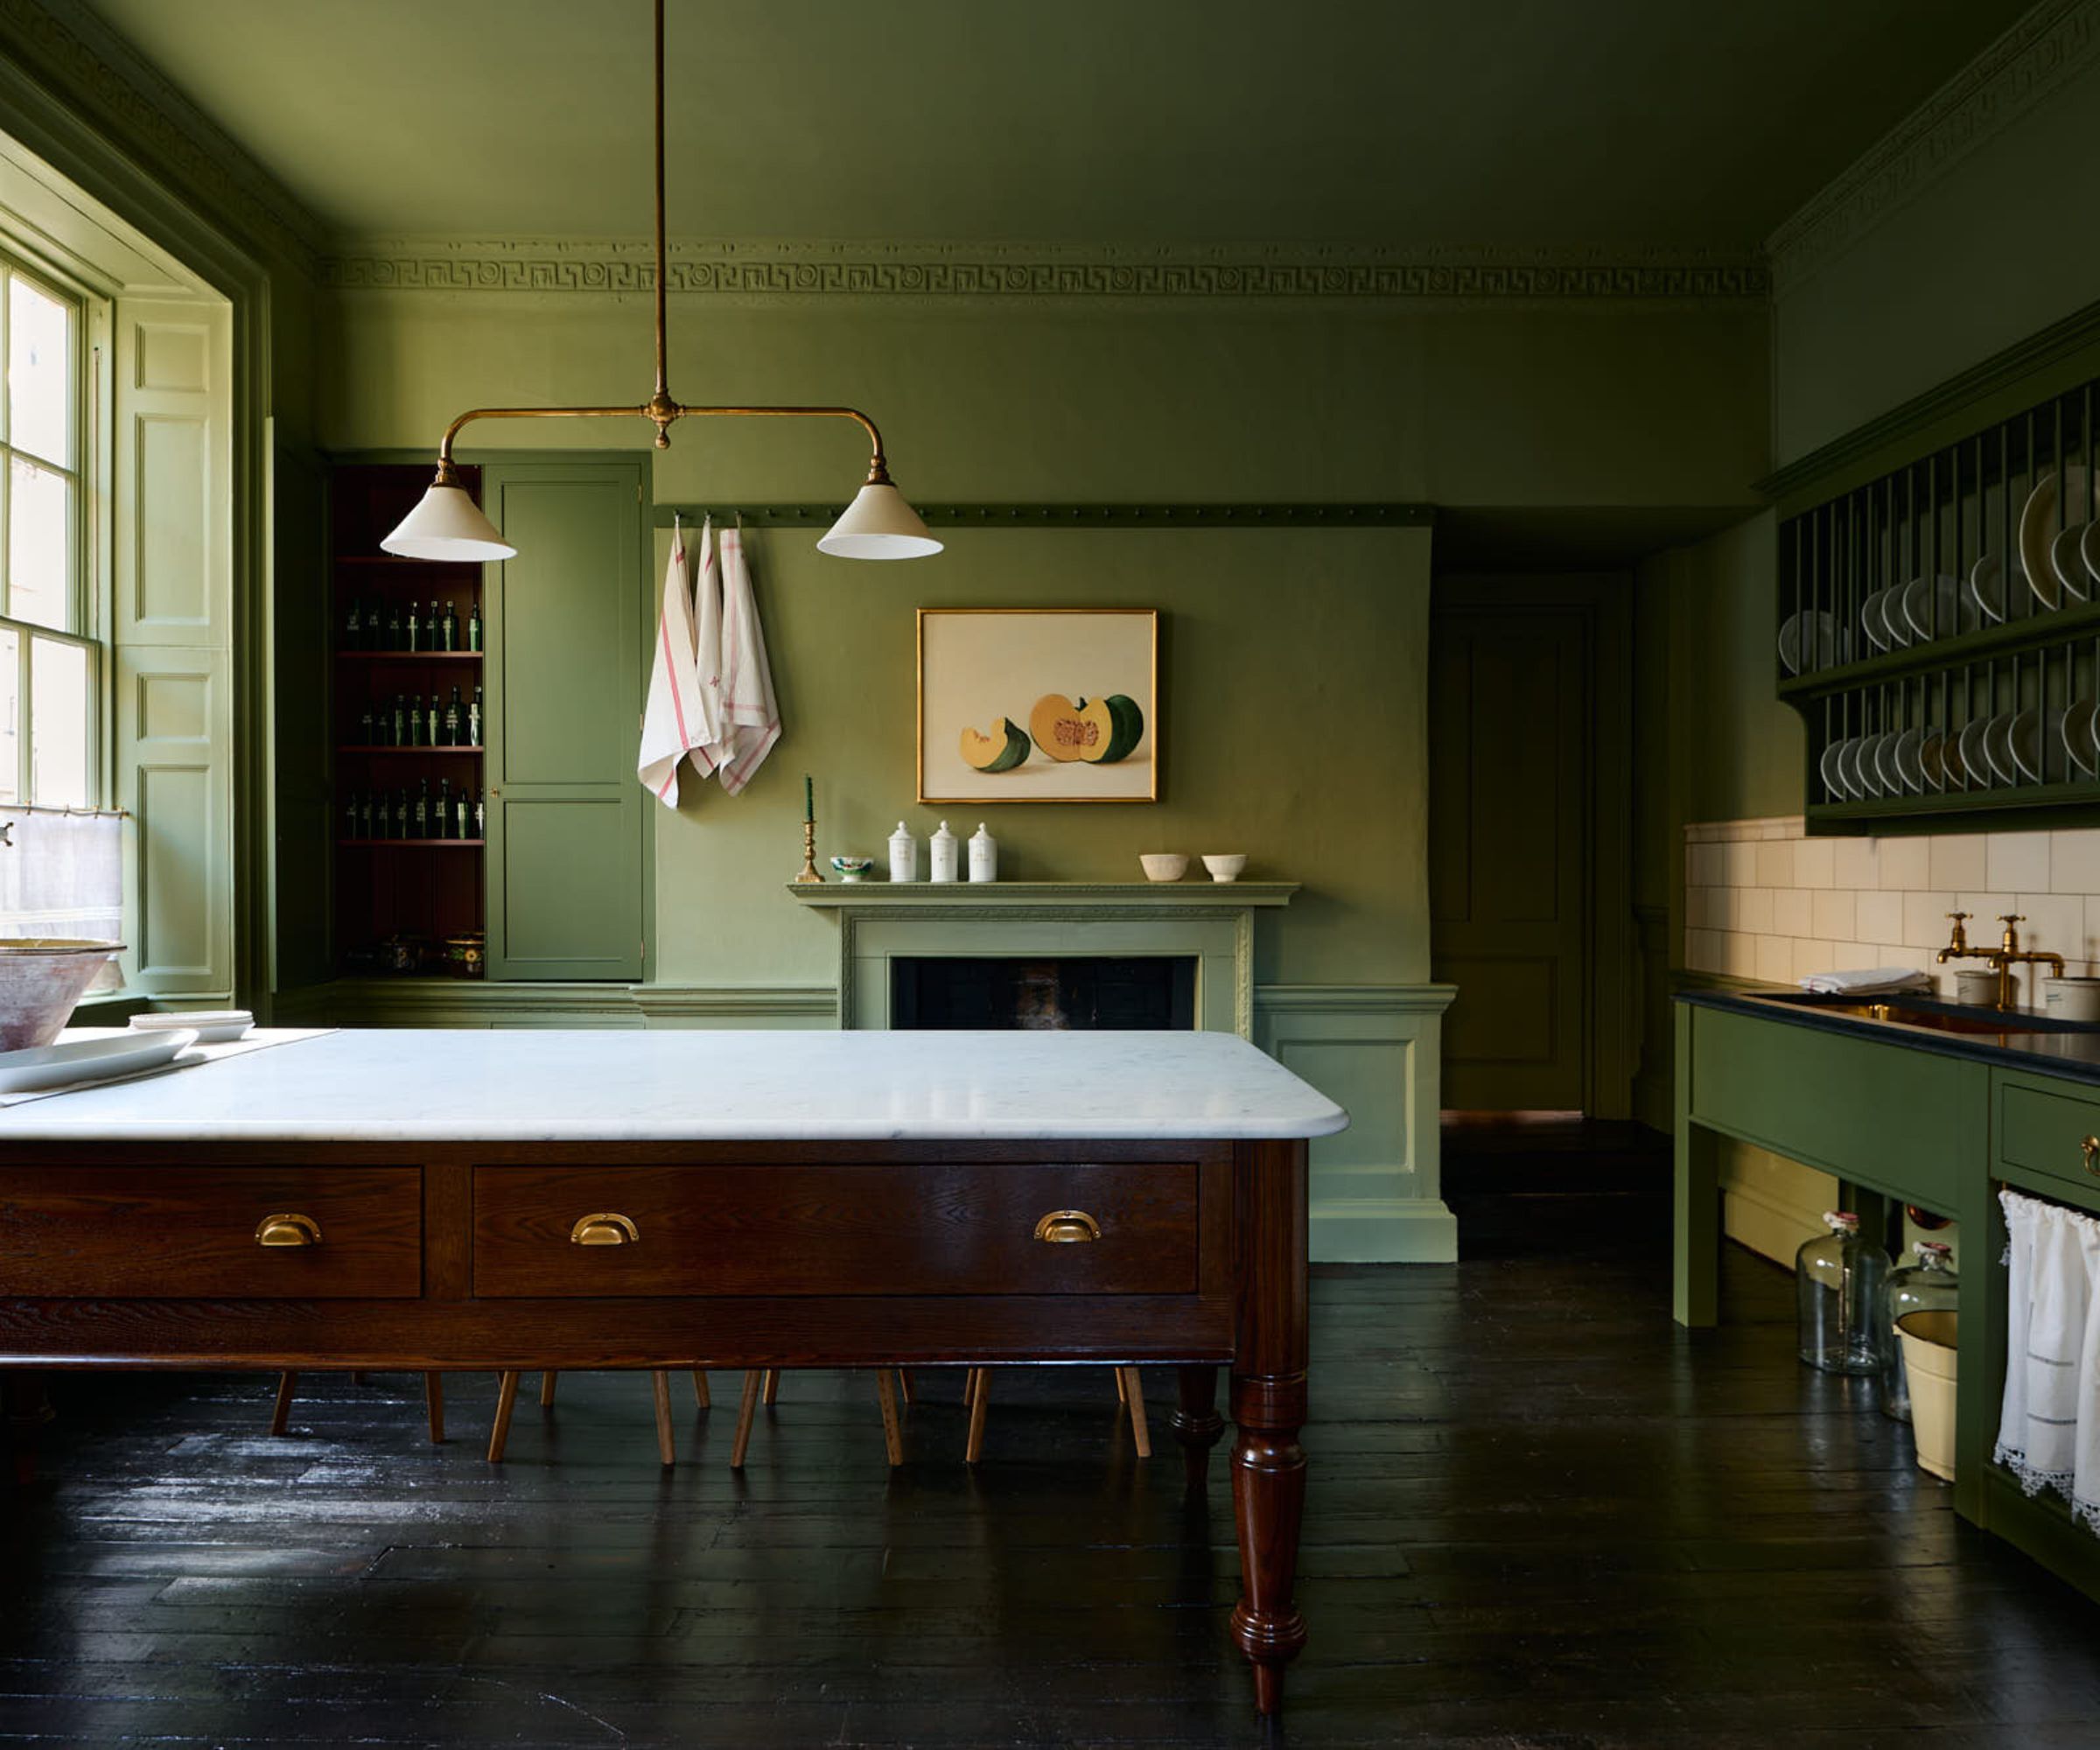 Kitchen color drenched in olive green paint with a burgundy kitchen island